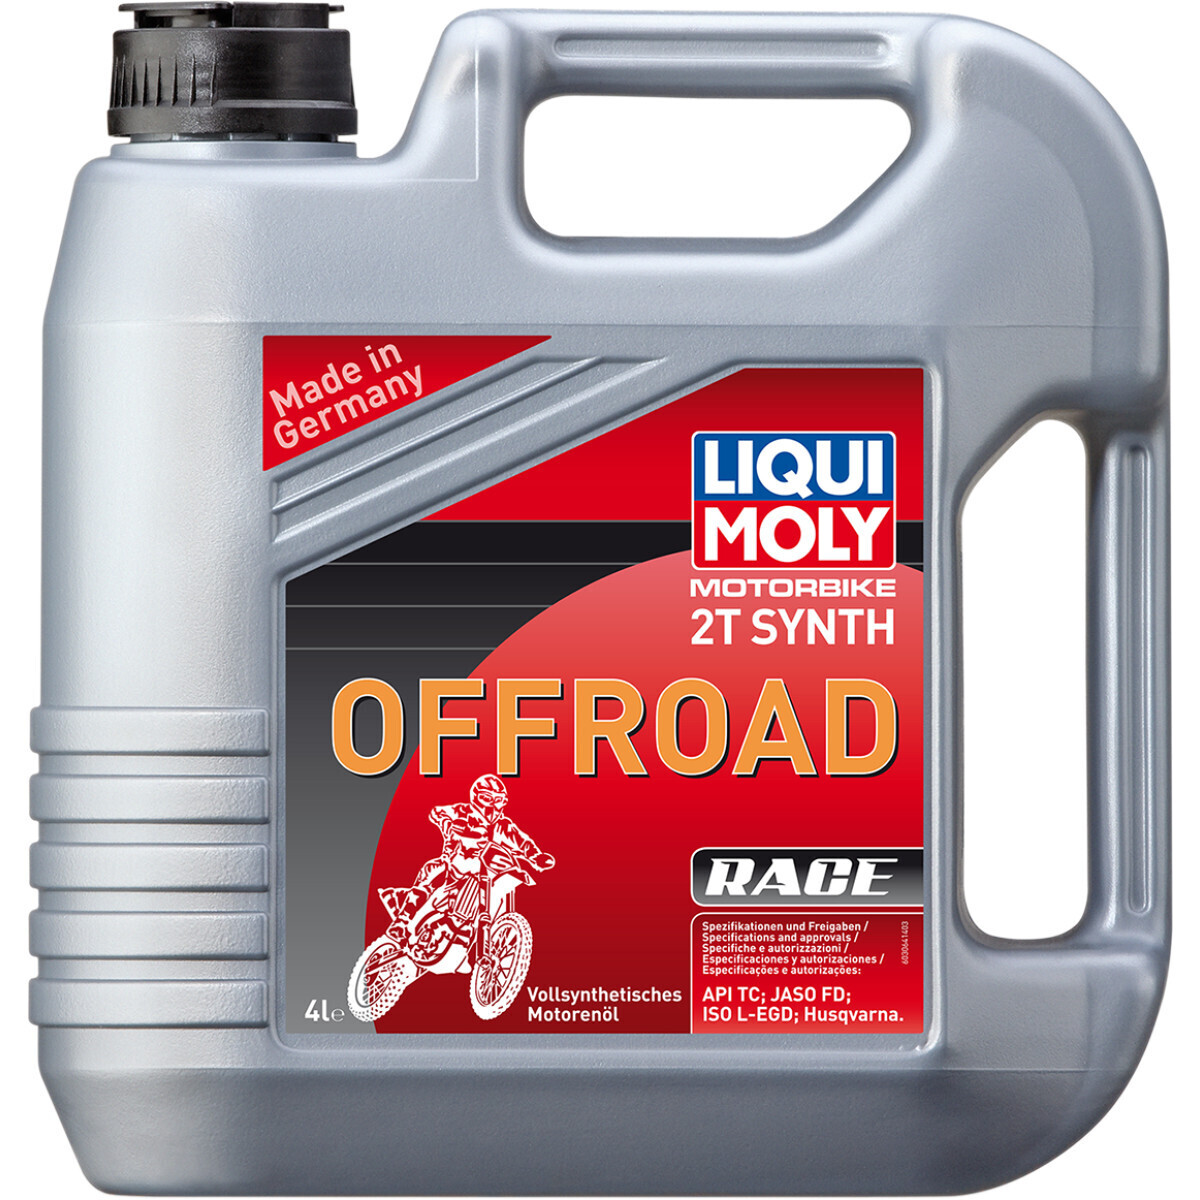 LIQUI MOLY
ENGINE OIL MOTORBIKE 2T FULLY SYNTHETIC 4 LITER